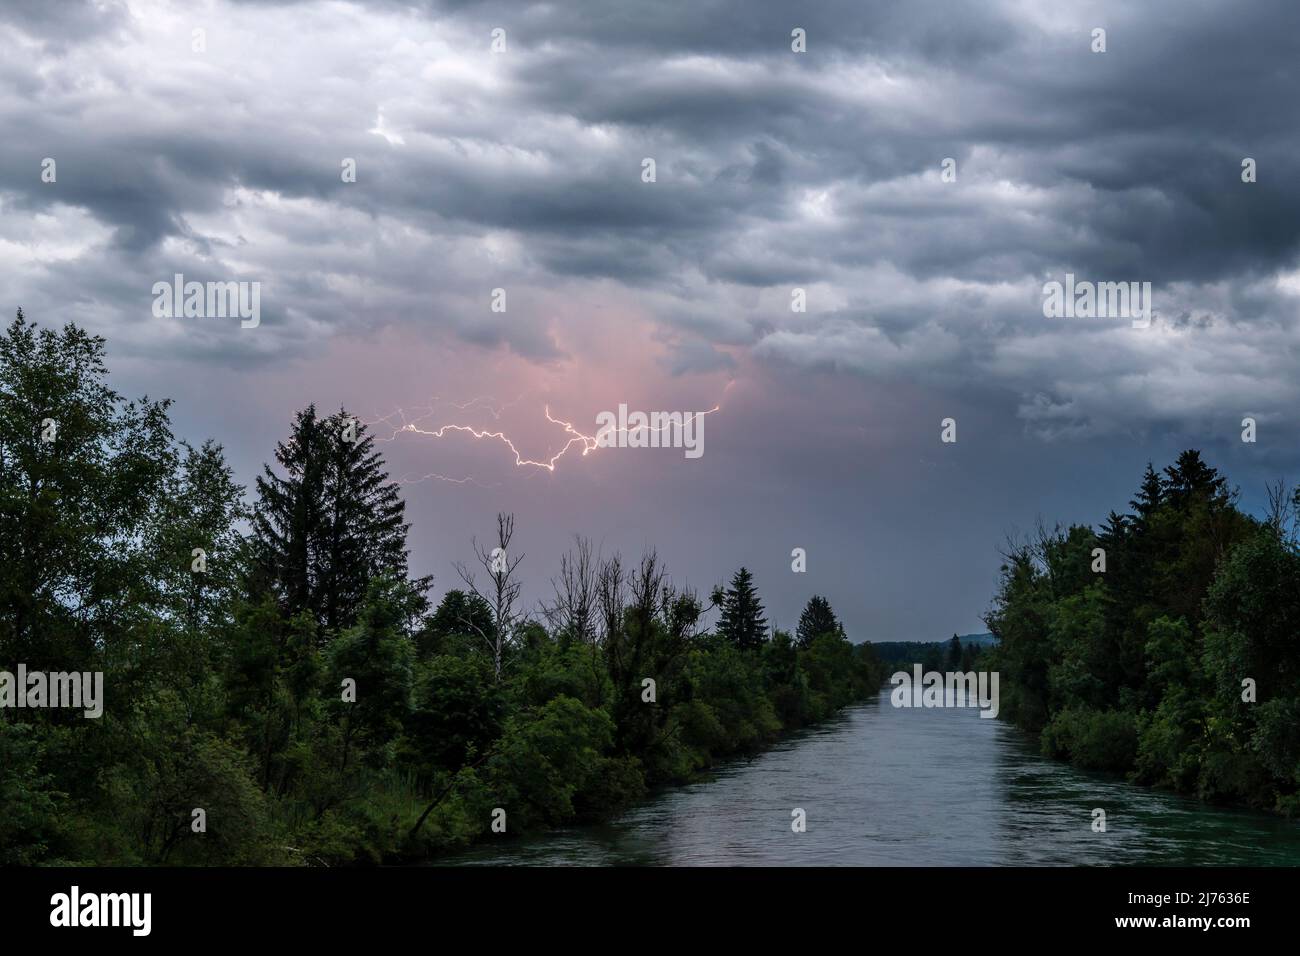 Lightning flashes in the sky above the Loisach, a well-known Bavarian river near Kochel am See, among other places. Thick clouds and the wildly overgrown course of the river contribute to the gloomy atmosphere. Stock Photo